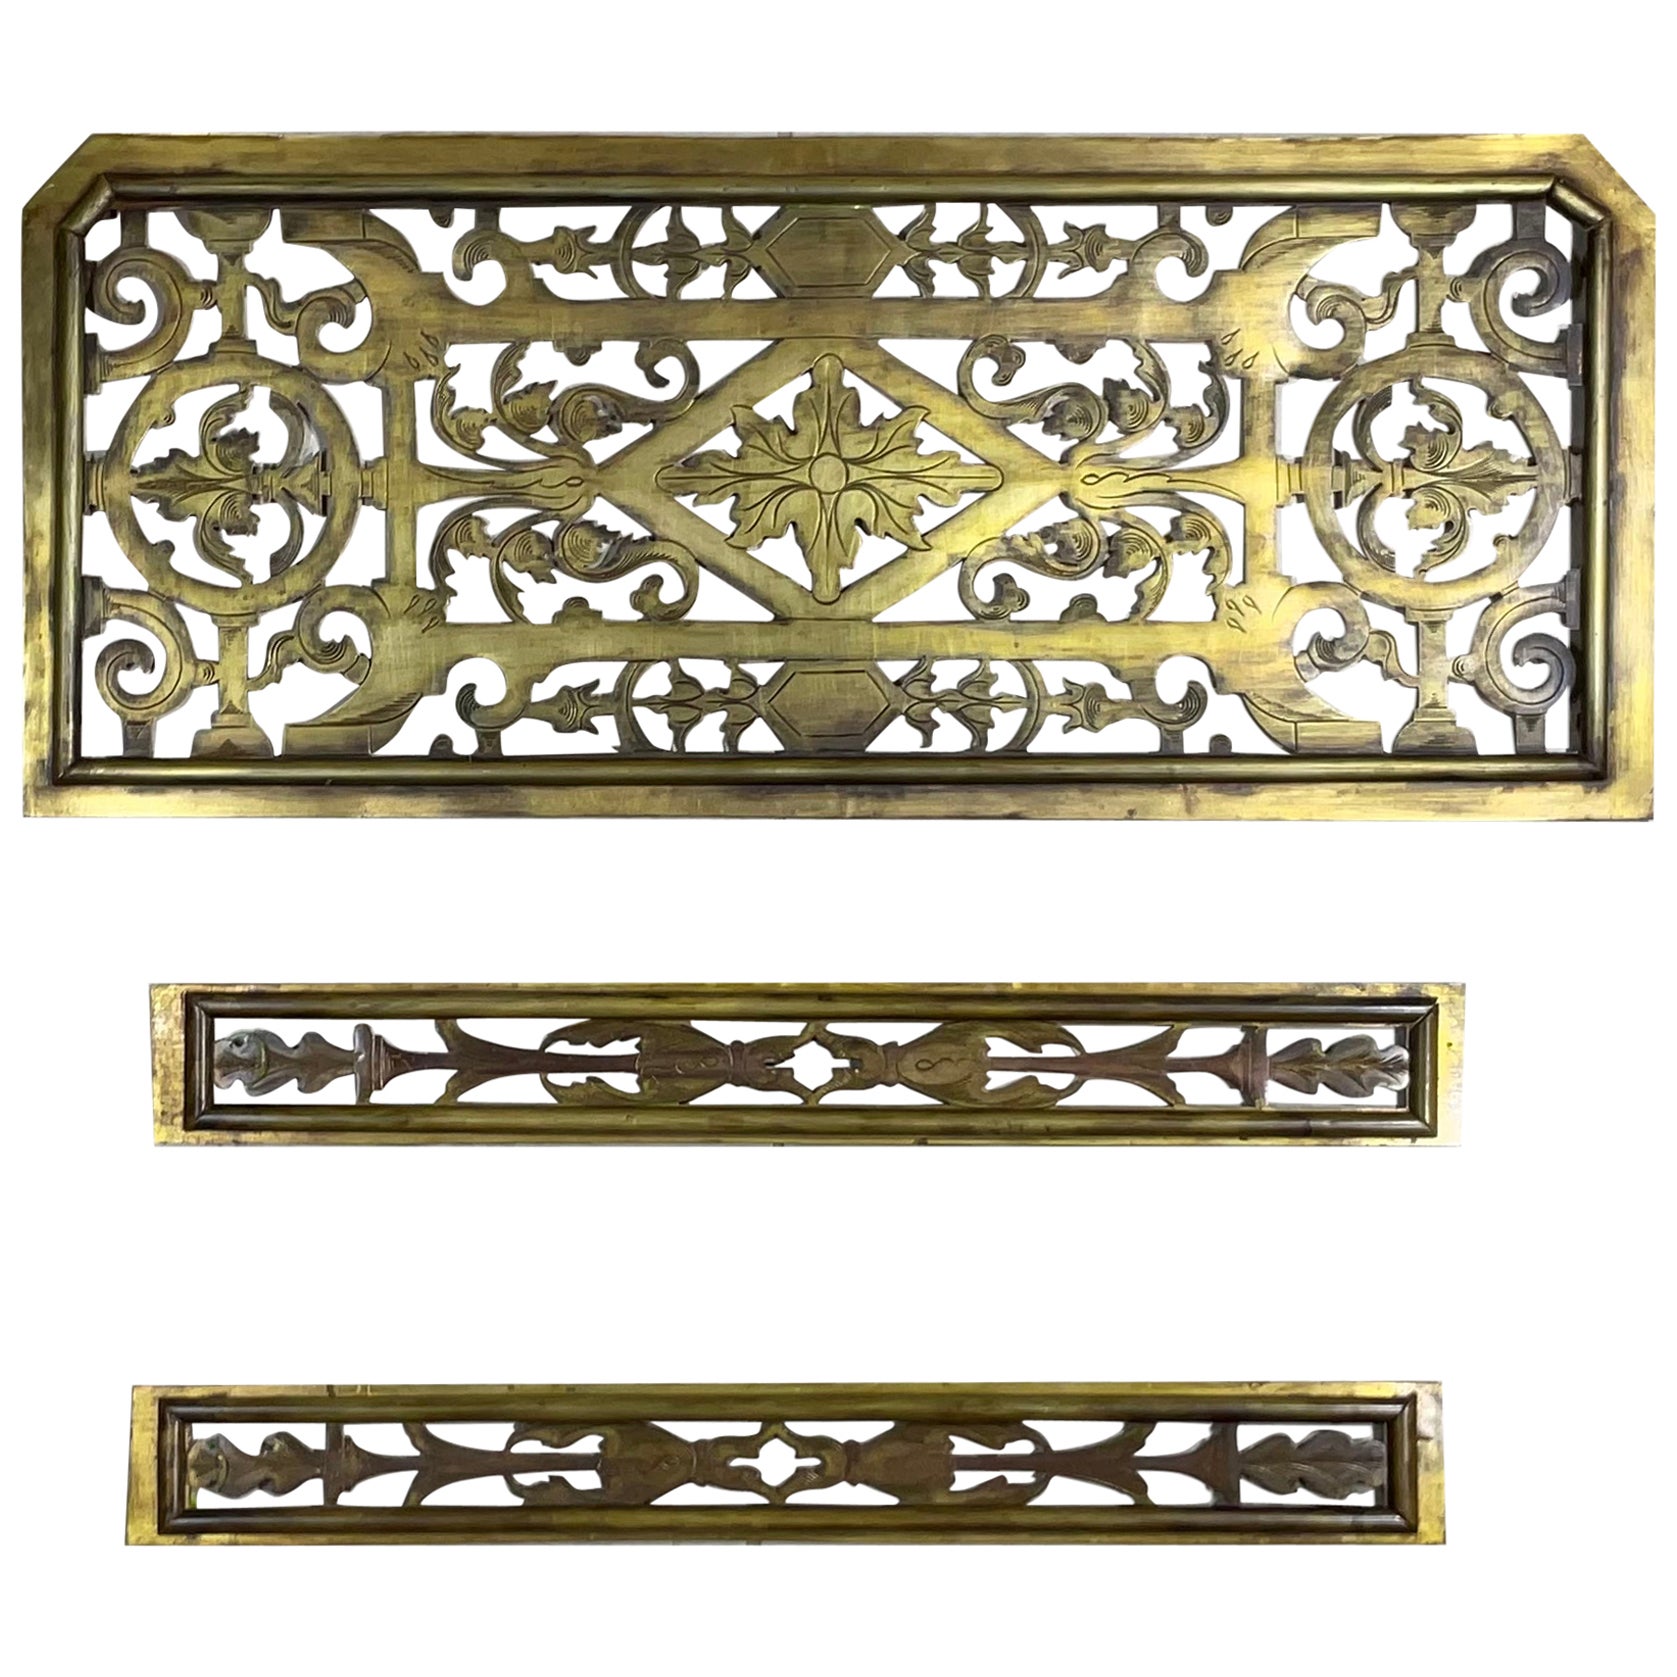 Three Piece 19th Century Brass Wall Hanging Ornament For Sale